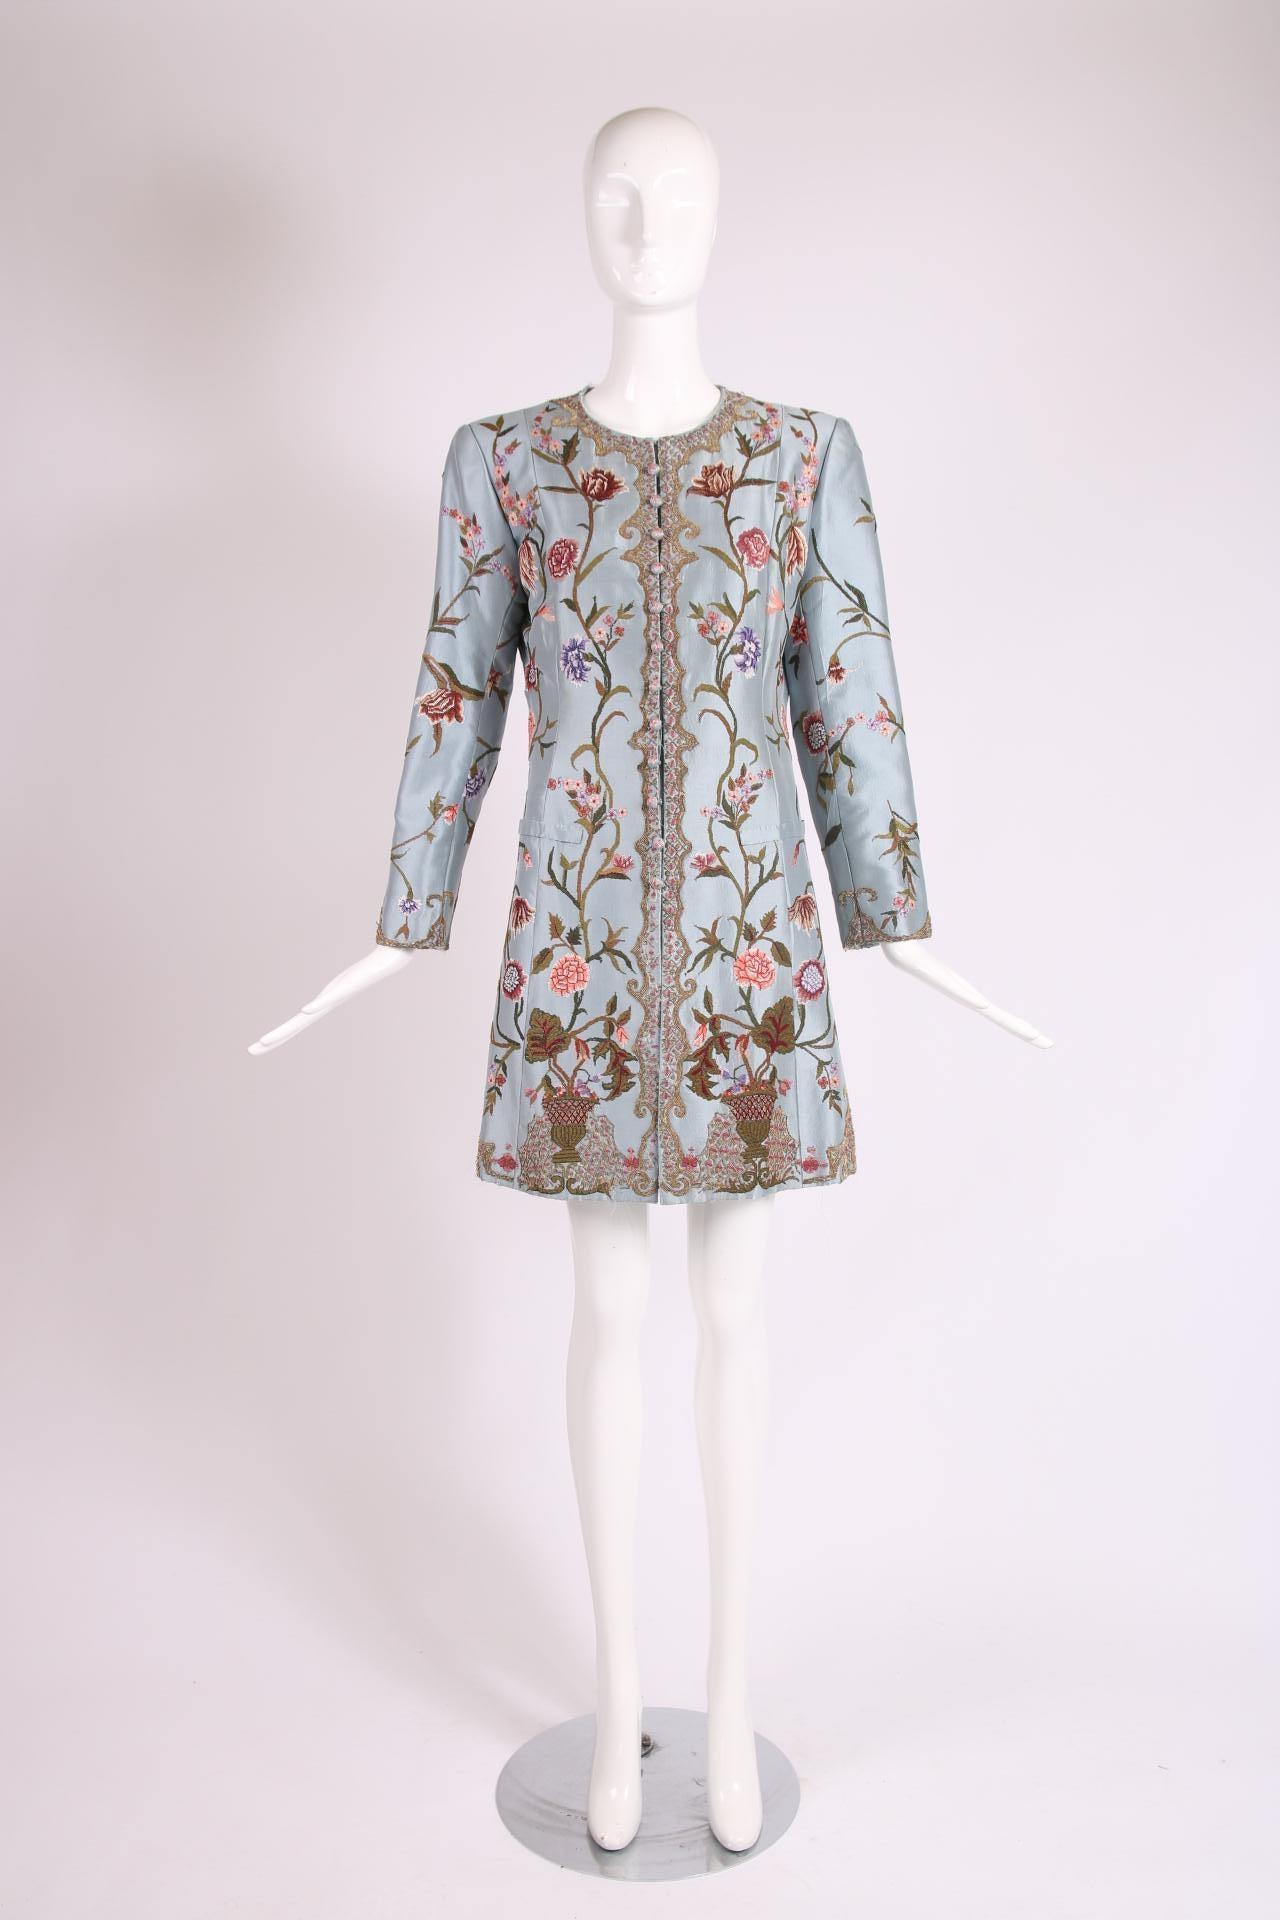 Balmain haute couture light blue silk oversized jacket with floral themed embroidery throughout, faux fabric-covered buttons down center front which hide interior hook and eye closures and interior with silk taffeta lining from the bust to the hem.